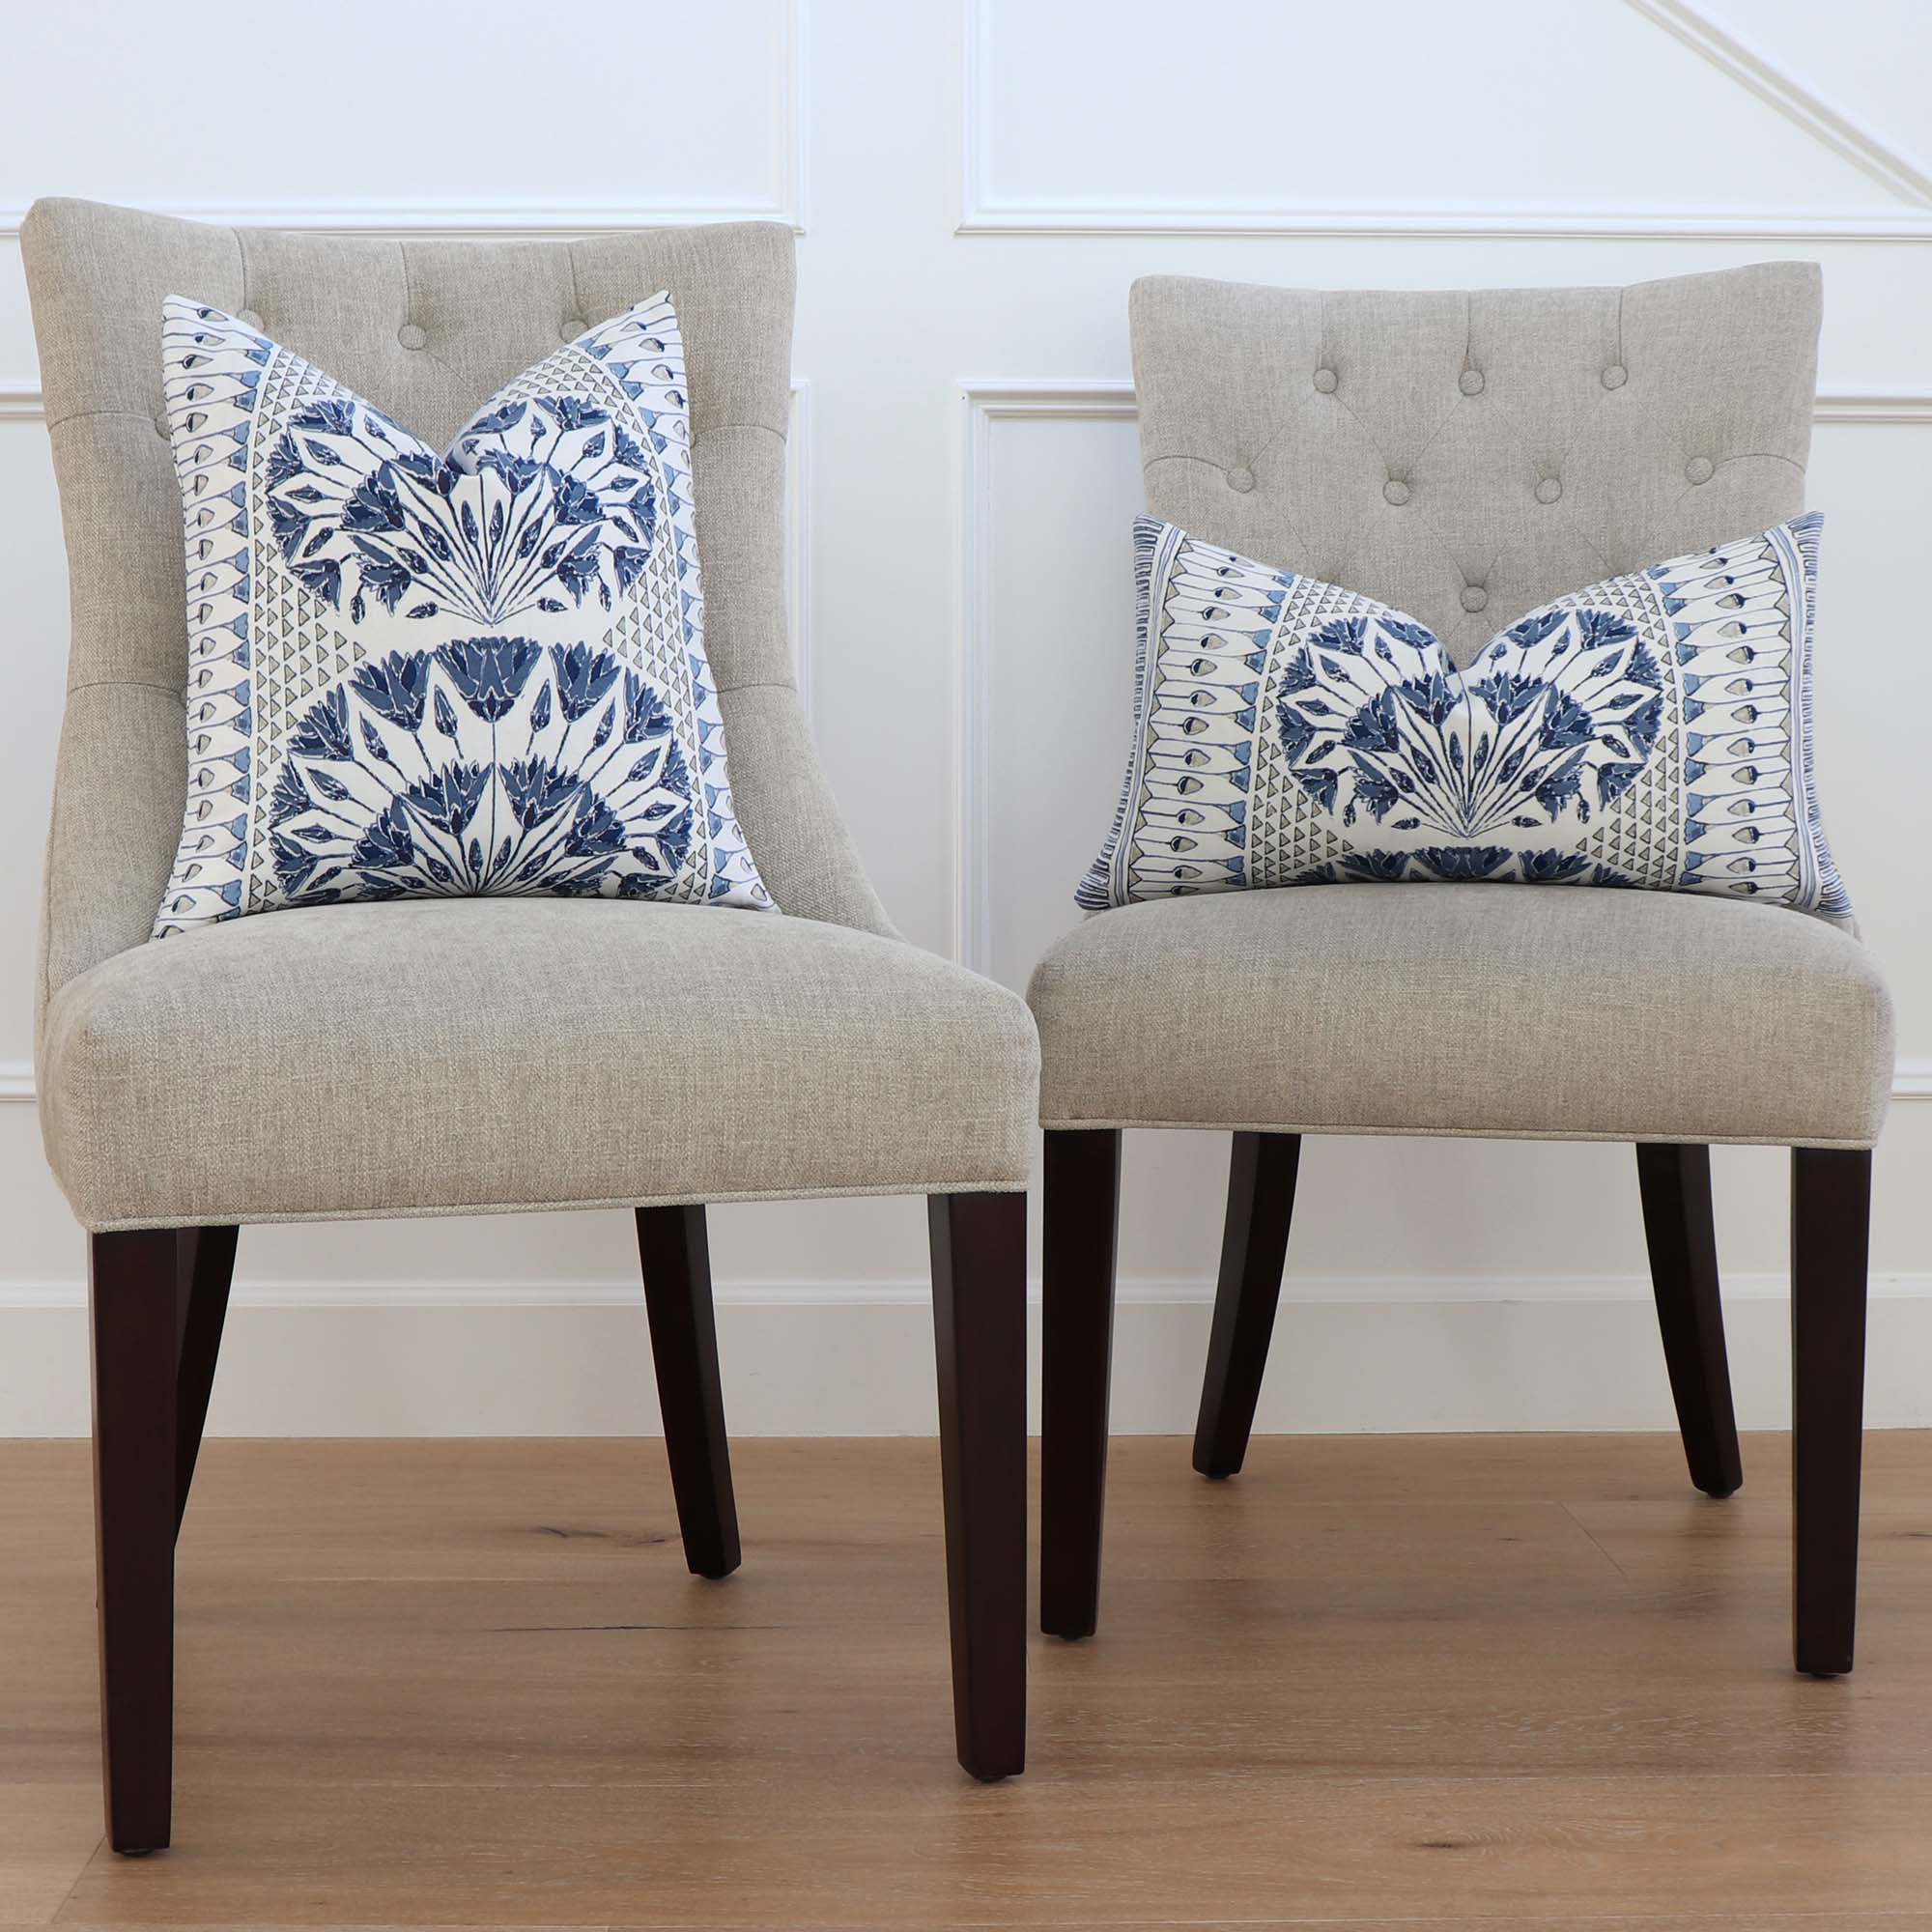 Thibaut Anna French Cairo Floral Blue Designer Luxury Throw Pillow Cover on Dining Side Chairs